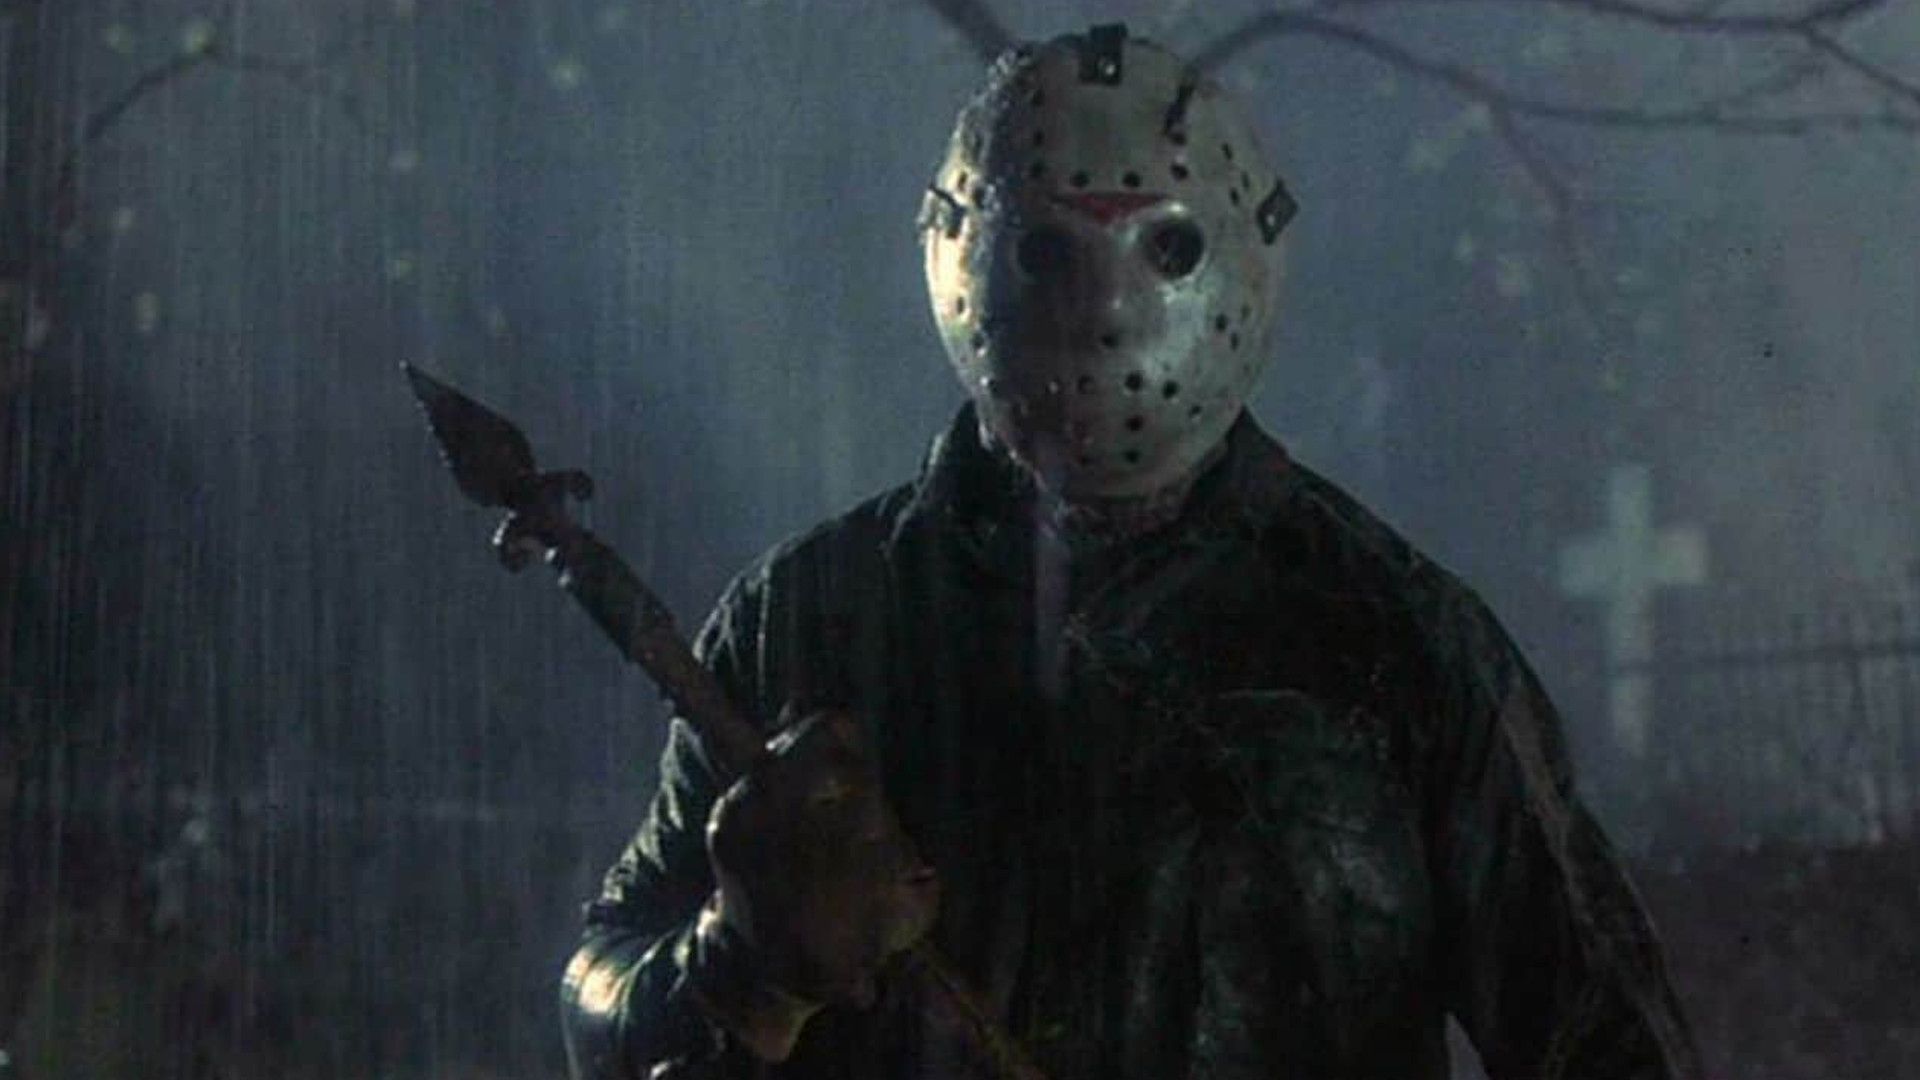 Original Friday the 13th Director Cuts Down Hopes of a New Jason Movie Coming Soon